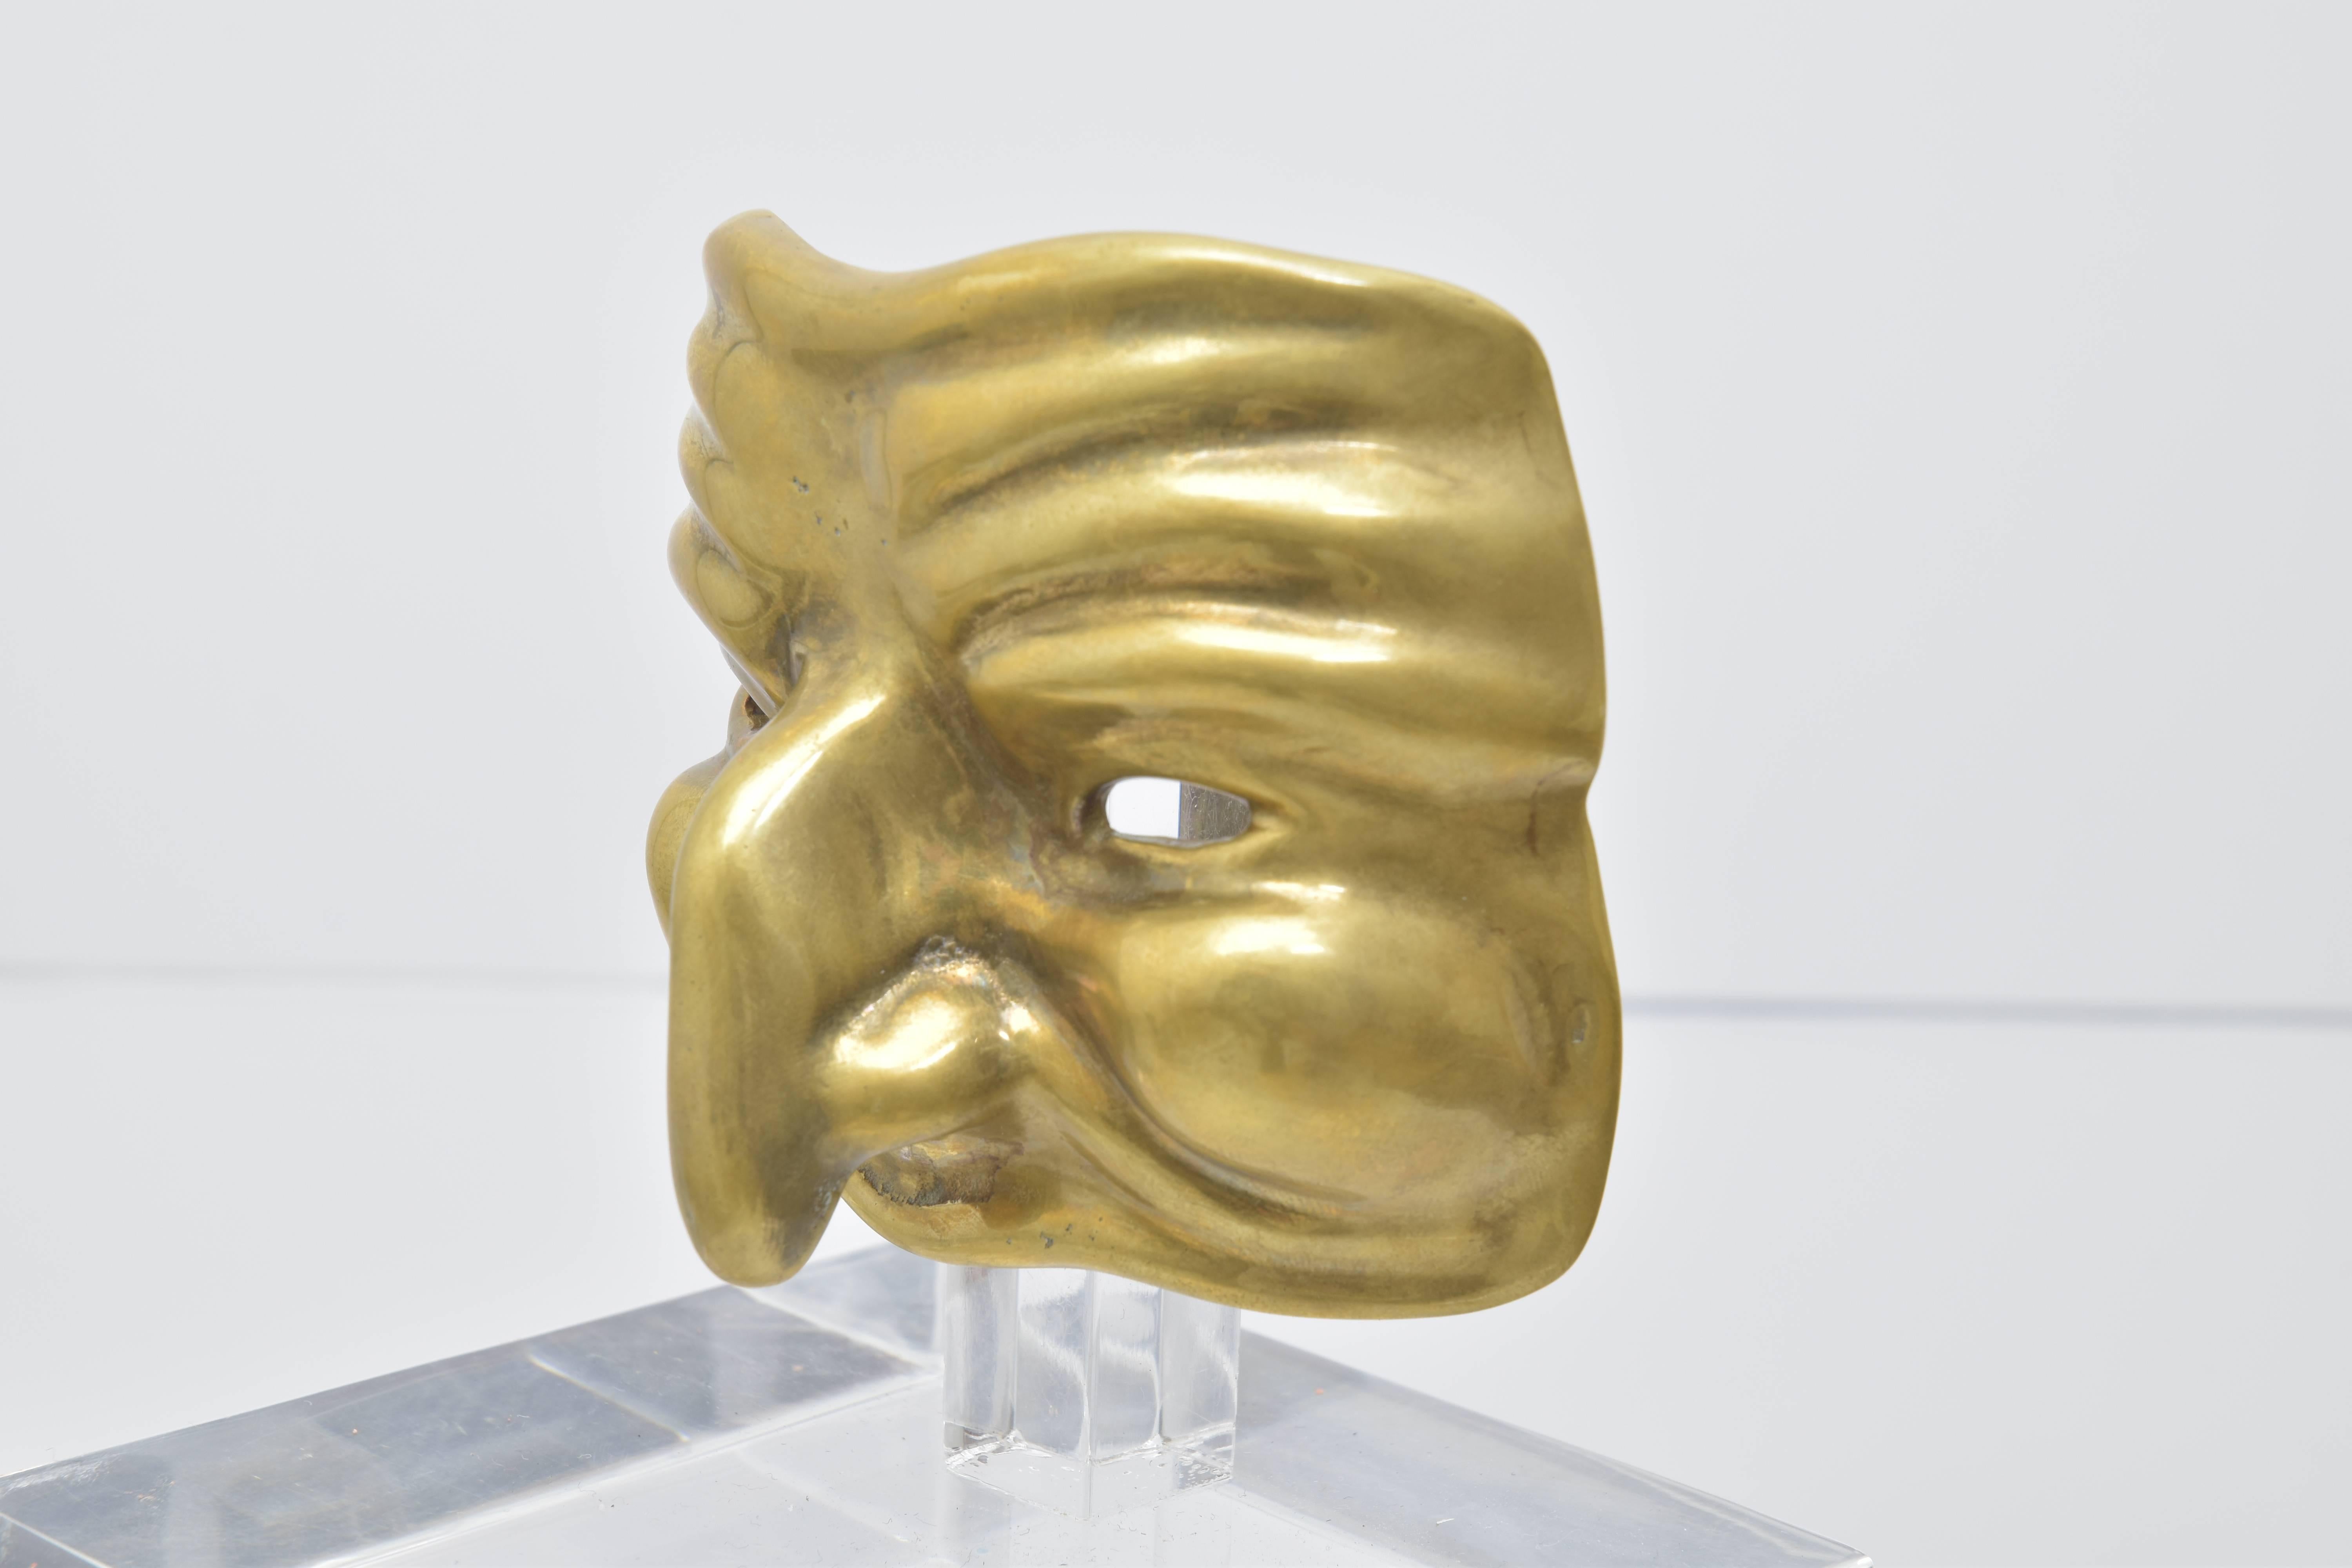 Two mounted brass theatre mask sculptures on Lucite bases.